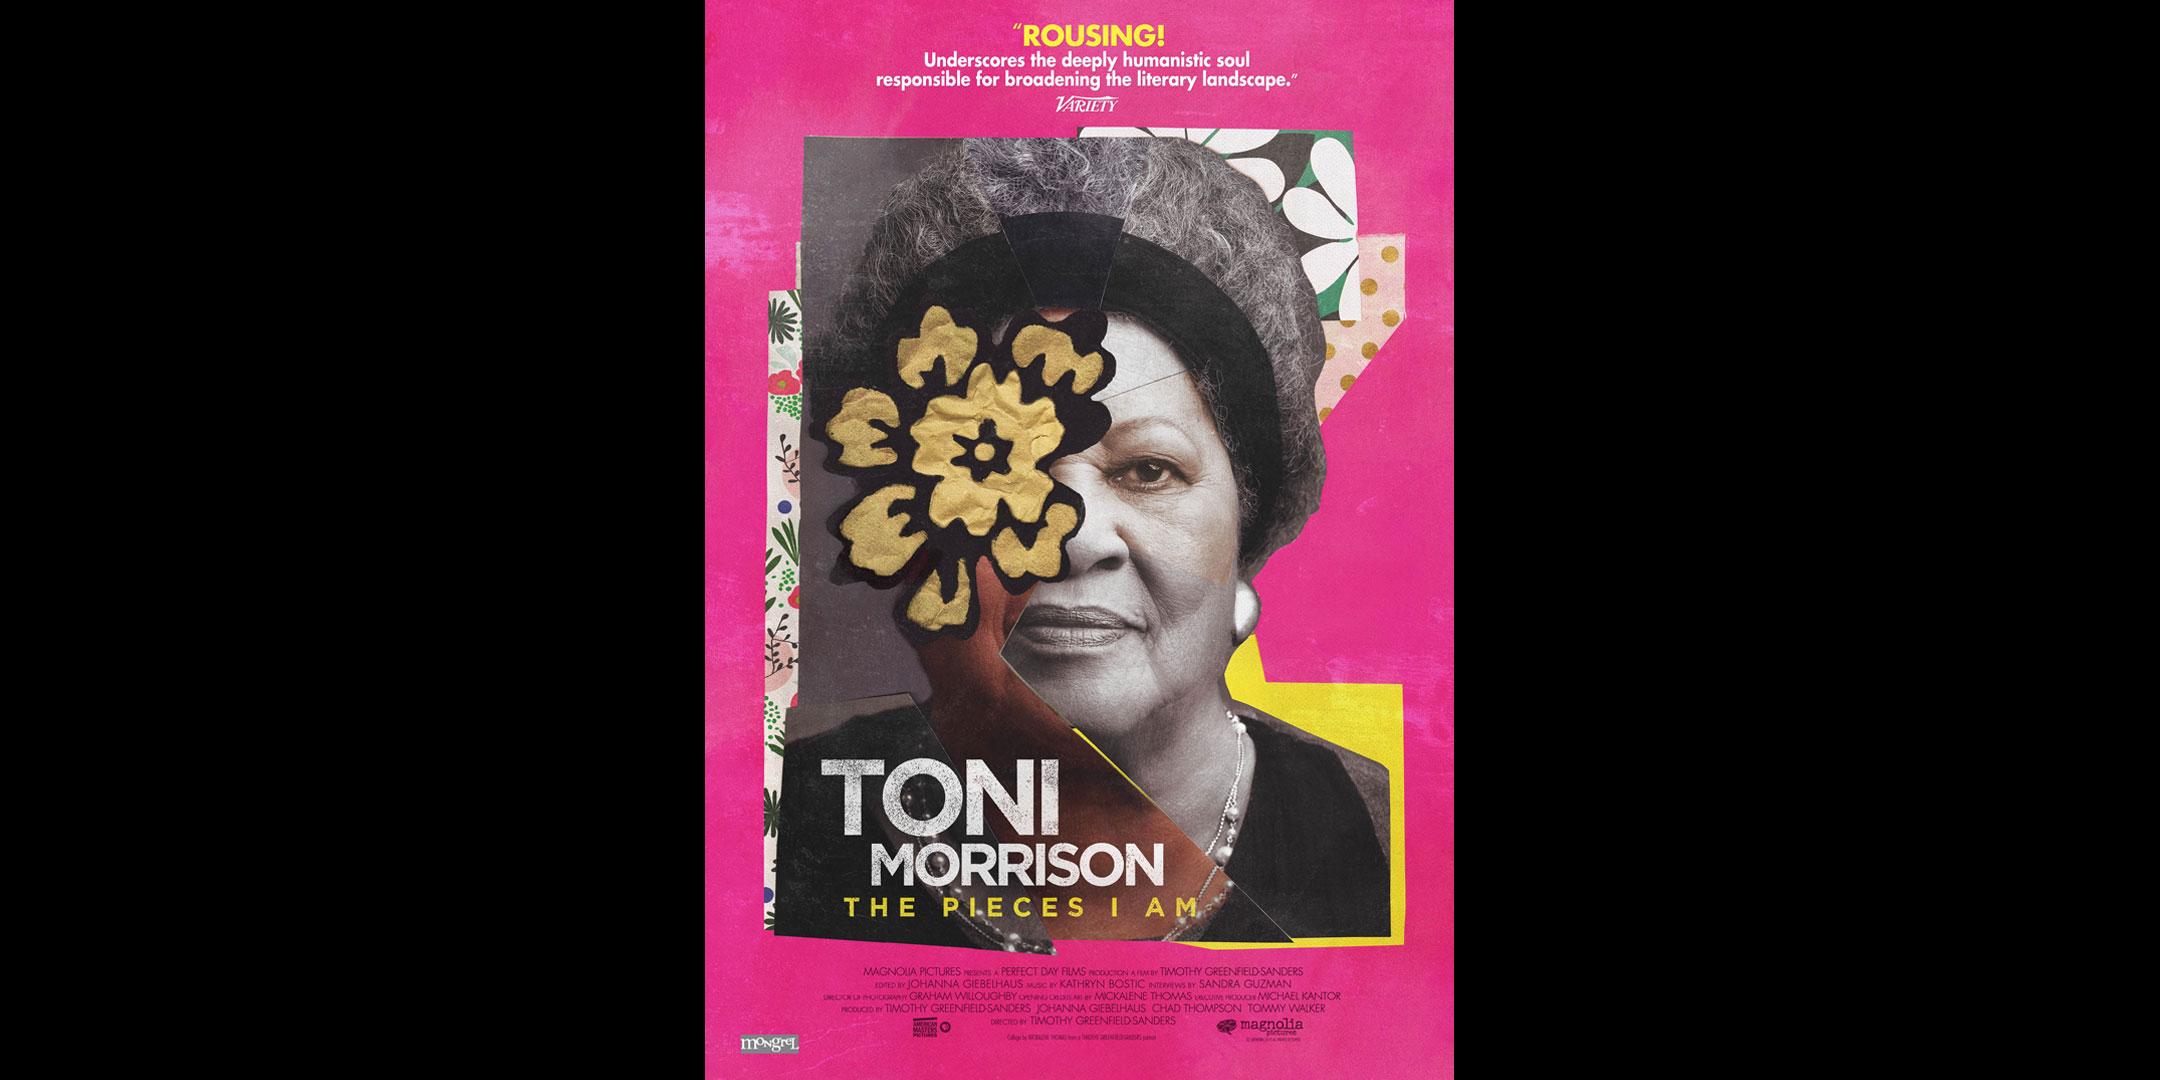 Toni Morrison: The Pieces I Am: Documentary Screening and Director's Q&A